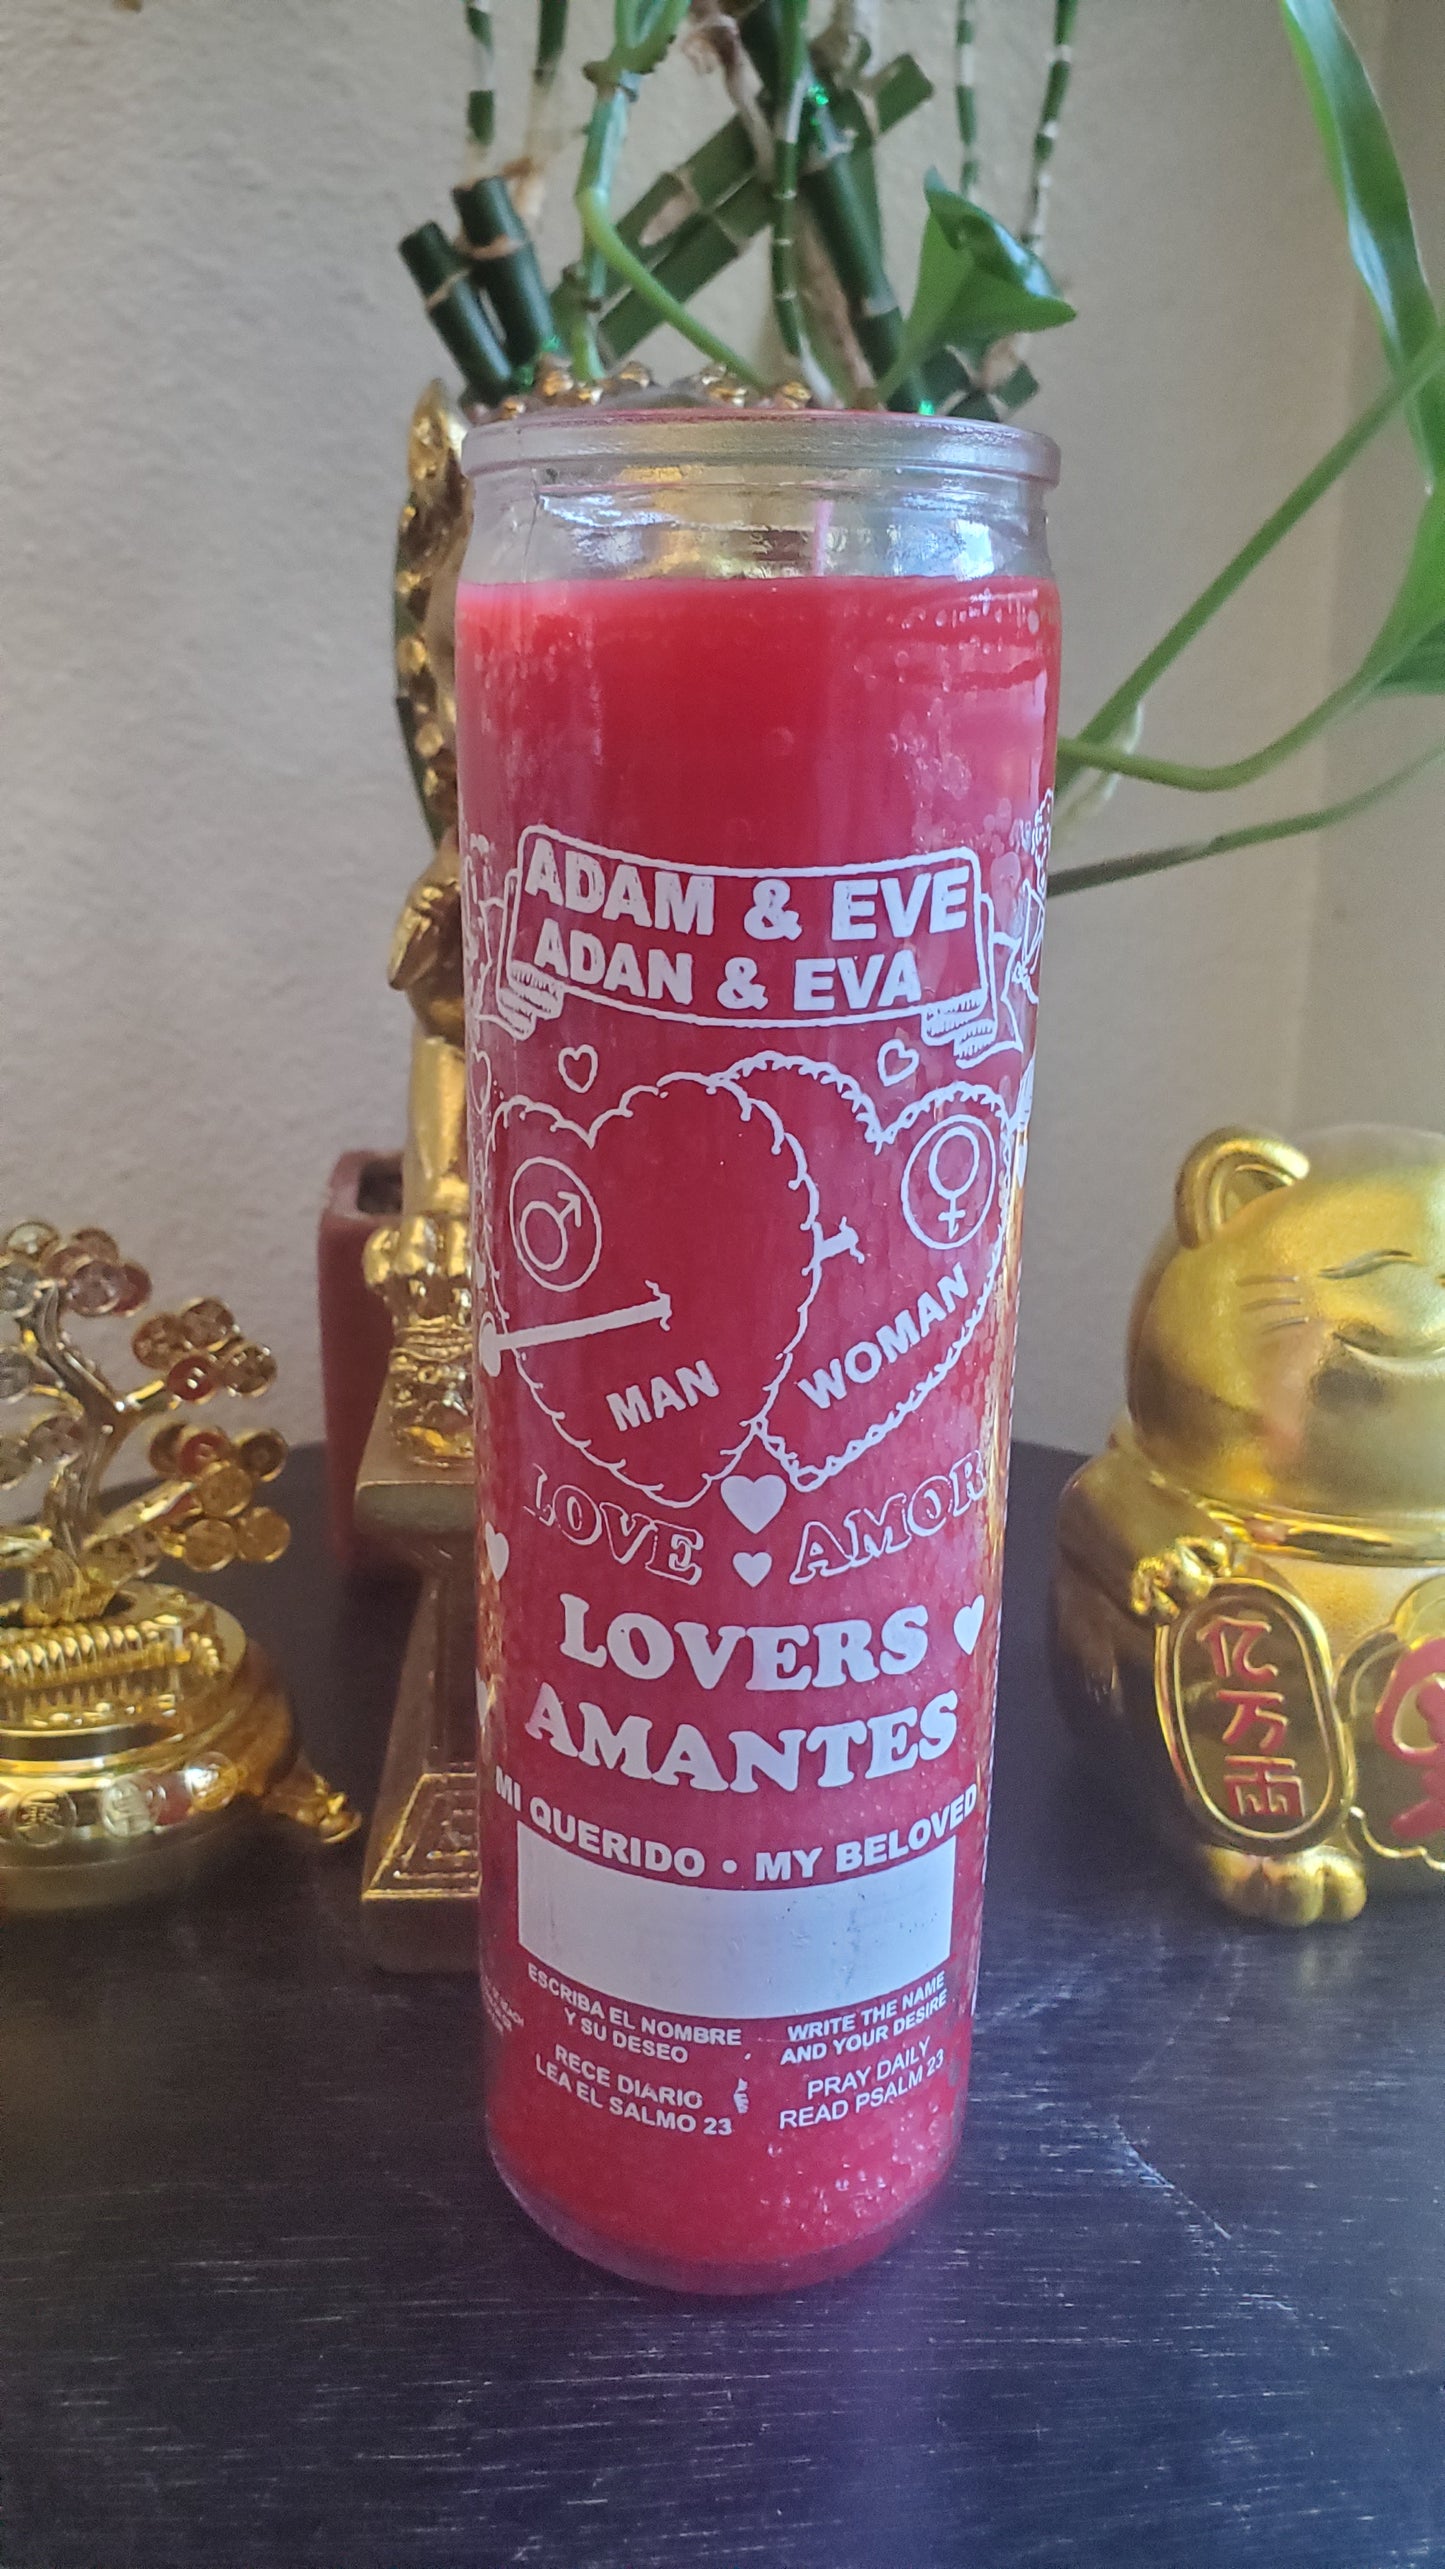 Adam & Eve Love Drawing 7 Day Love Candle** #SpellCandle #RootWork #conjure #LoveMagick #LoveDrawing #AltarMagick